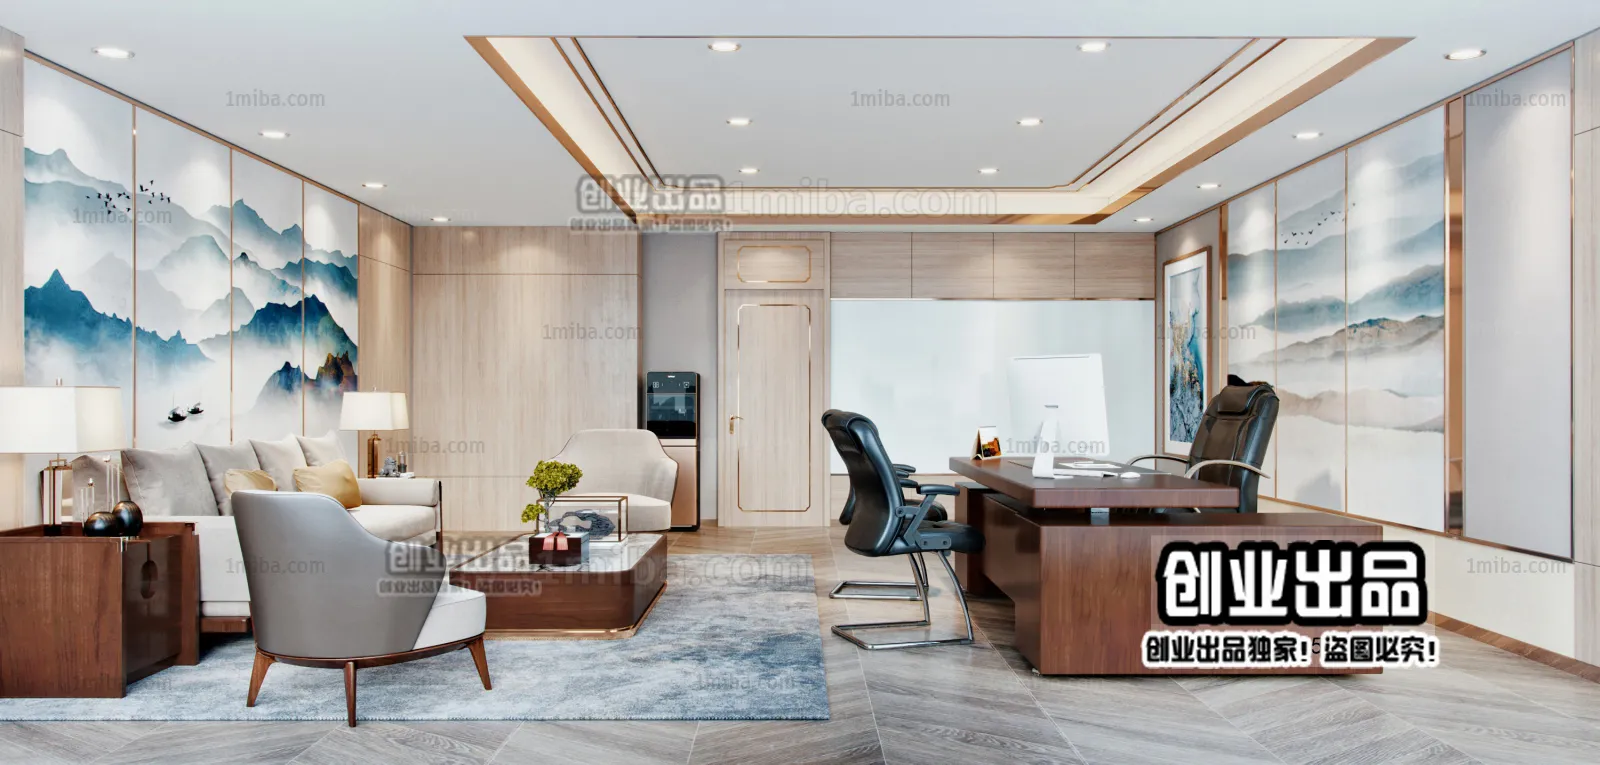 3D OFFICE INTERIOR (VRAY) – MANAGER ROOM 3D SCENES – 014